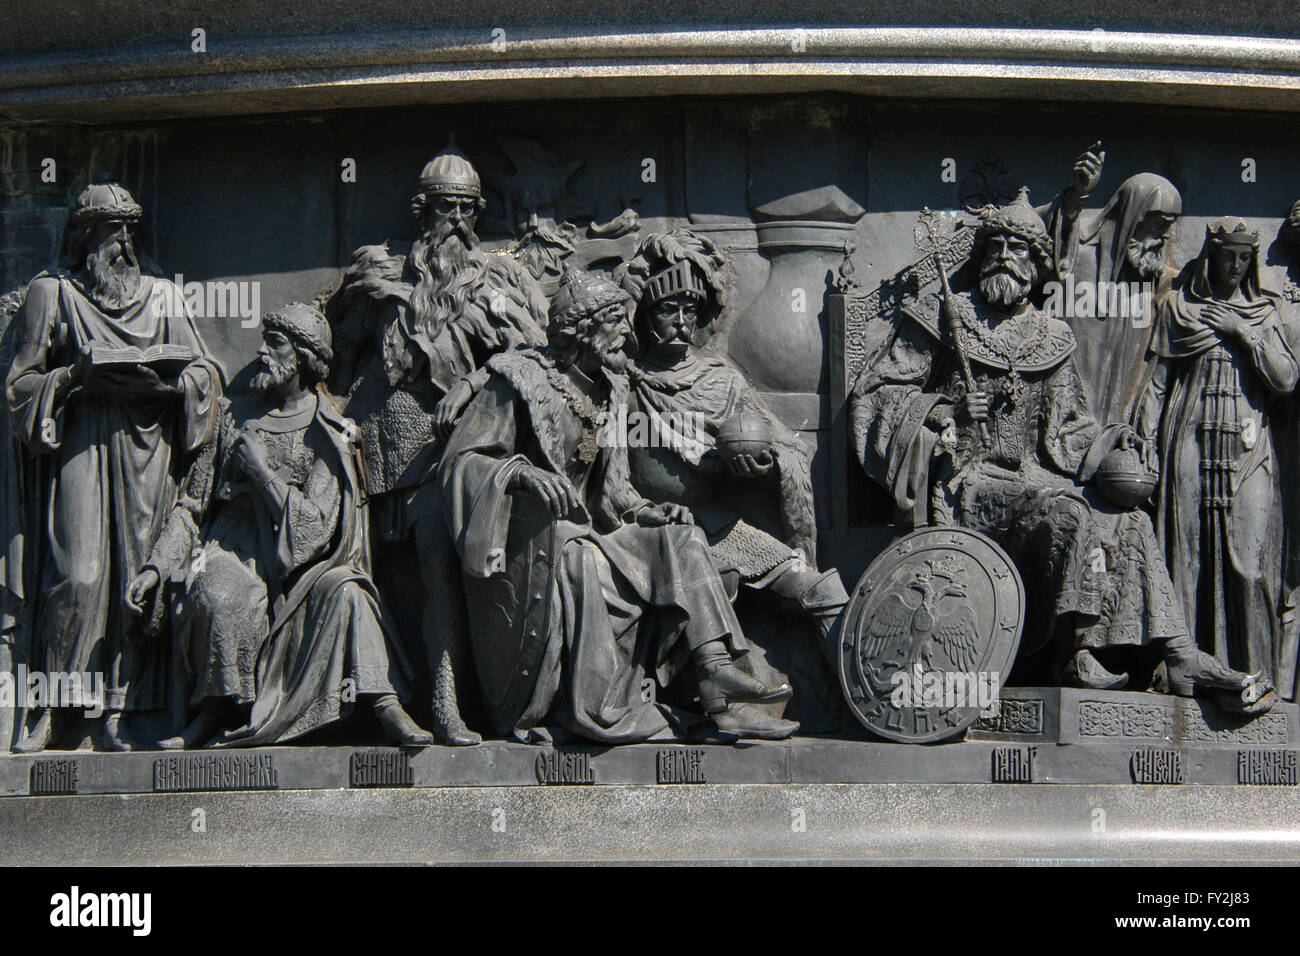 Kievan princes Yaroslav the Wise and Vladimir Monomakh, Lithuanian princes Gediminas, Algirdas and Vytautas the Great, Grand Prince Ivan III of Moscow, also known as Ivan the Great, depicted (from left to right) in the bas relief dedicated to Russian statesmen by Russian sculptor Nikolai Laveretsky. Detail of the Monument to the Millennium of Russia (1862) designed by Mikhail Mikeshin in Veliky Novgorod, Russia. Protopope Silvester, the companion of Ivan the Terrible, and Anastasia Romanovna, the first wife of Ivan the Terrible, are depicted in the background in the right. Stock Photo